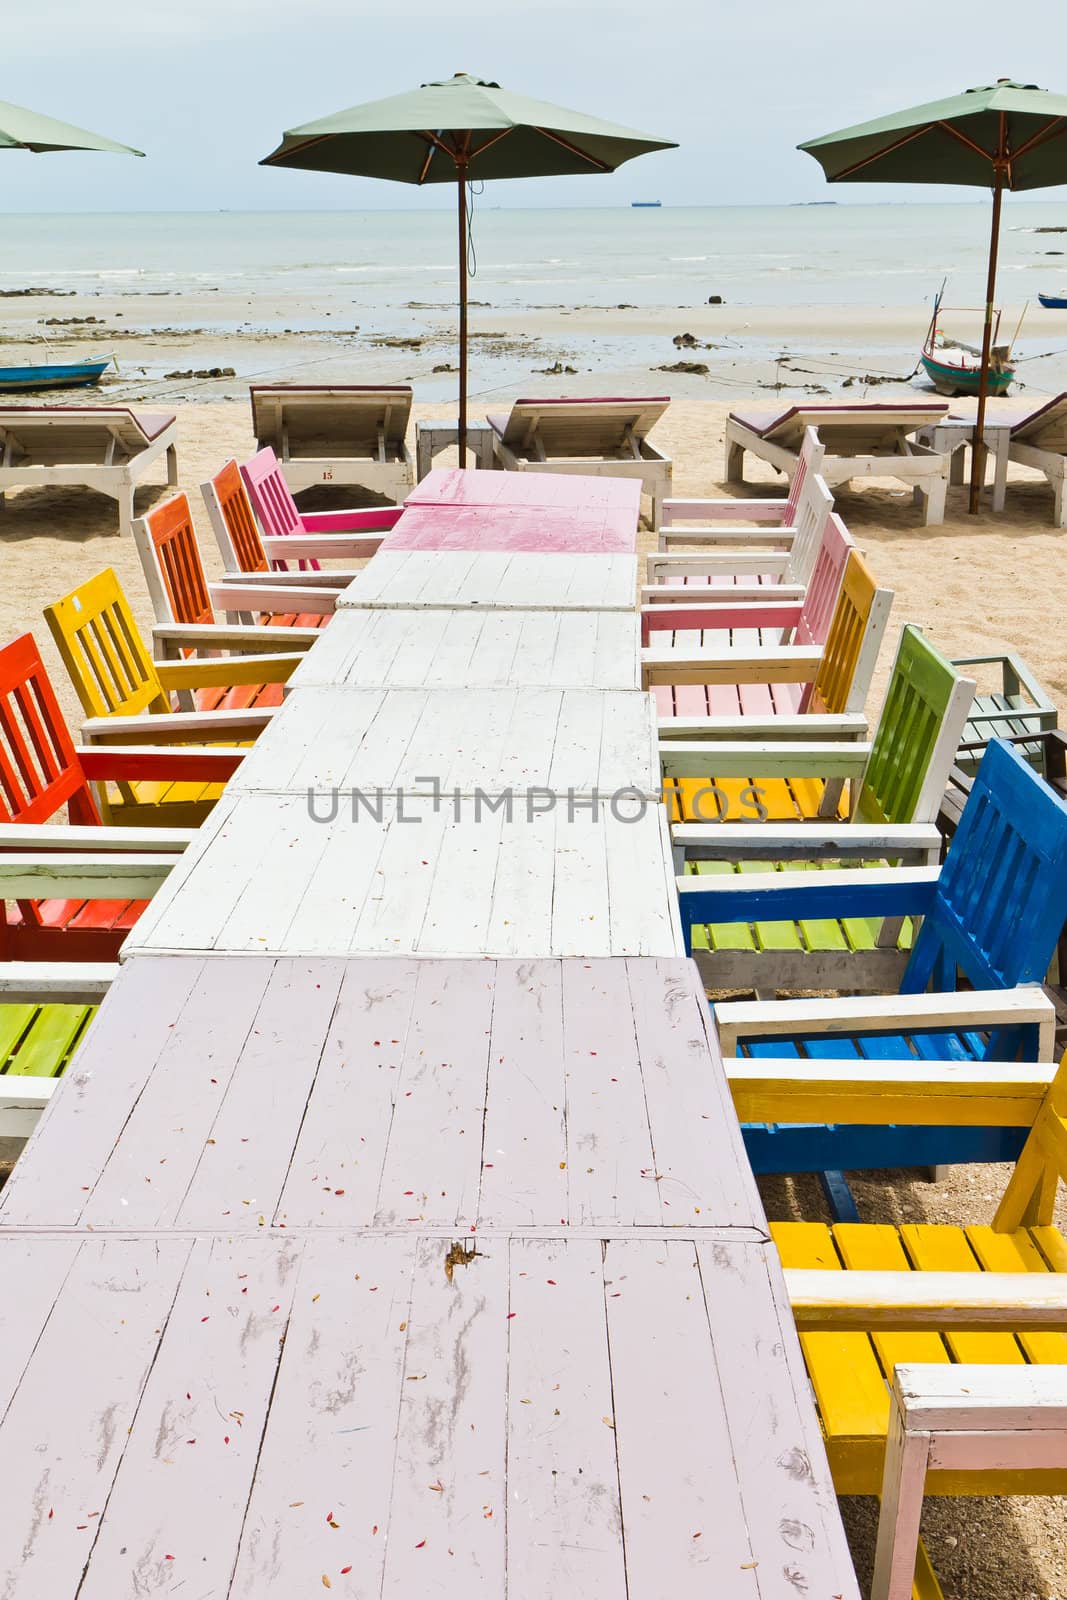 Tables, chairs, colorful. Side of the seafood restaurants. The eastern part of Thailand.